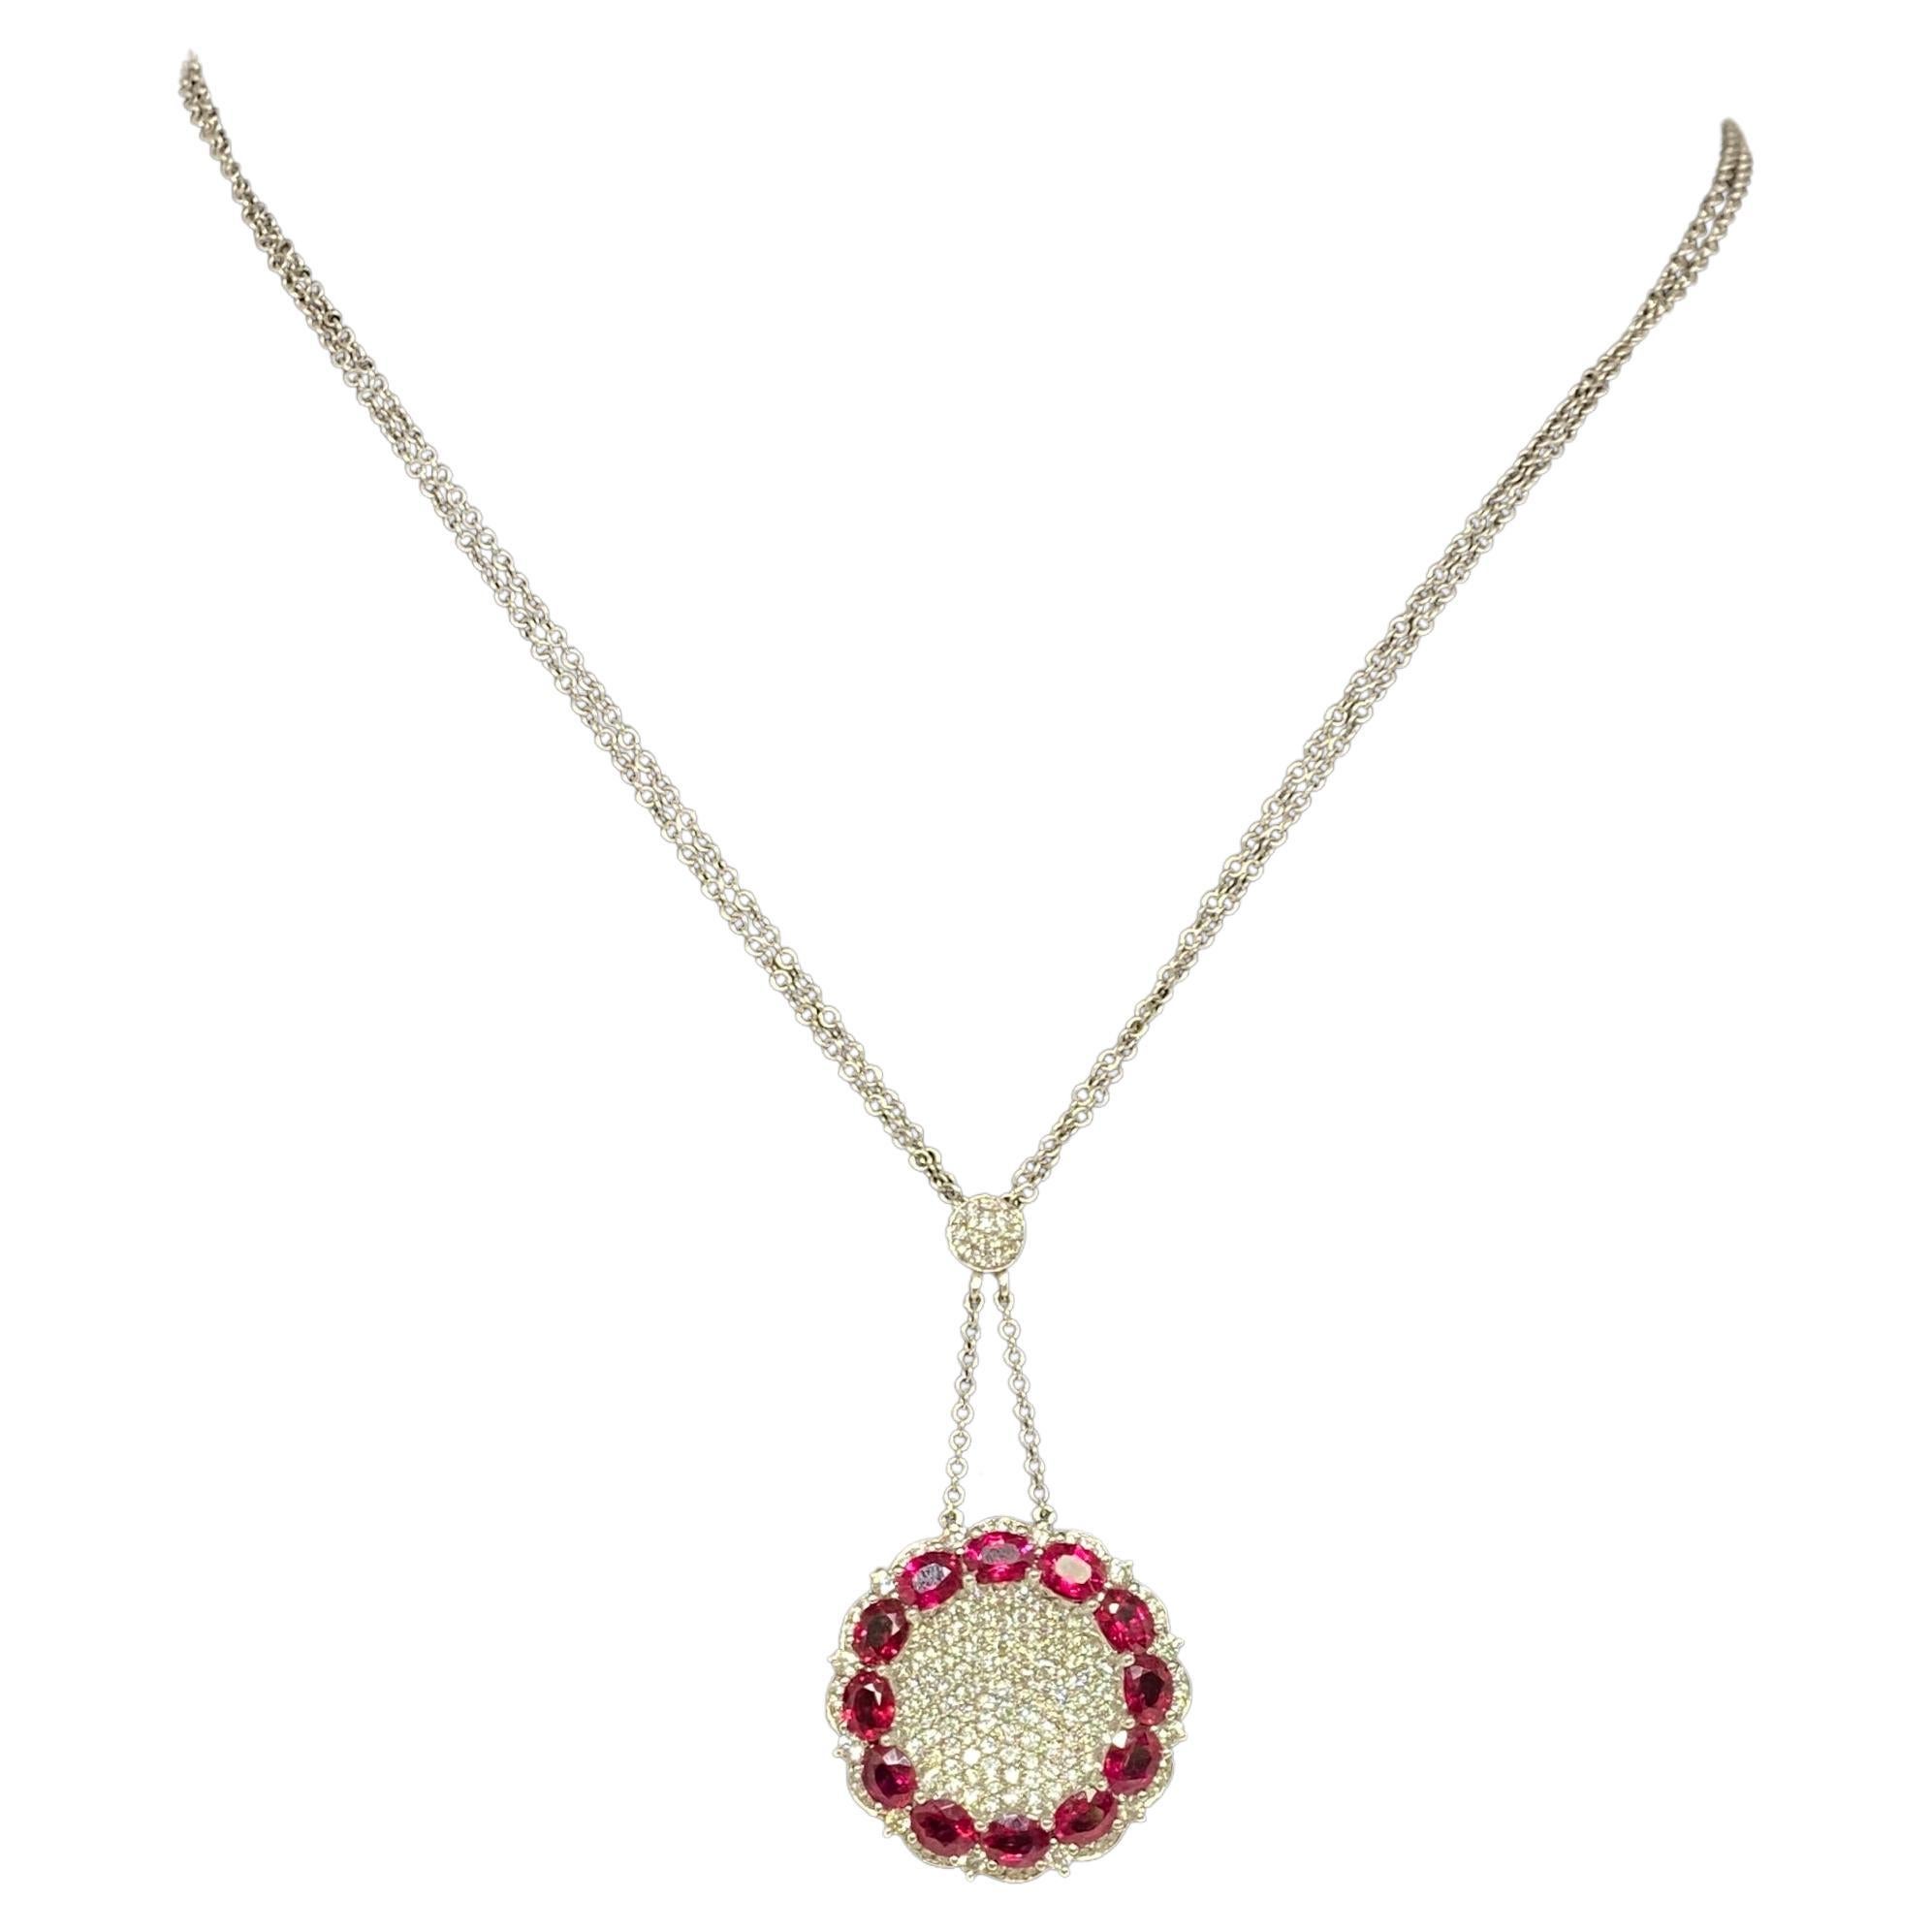 This 14k white gold necklace features a beautiful and striking round concave disc encrusted with sparkling natural round brilliant cut diamonds and a contrasting halo of larger oval vivid natural red rubies suspended from a small diamond cluster. 